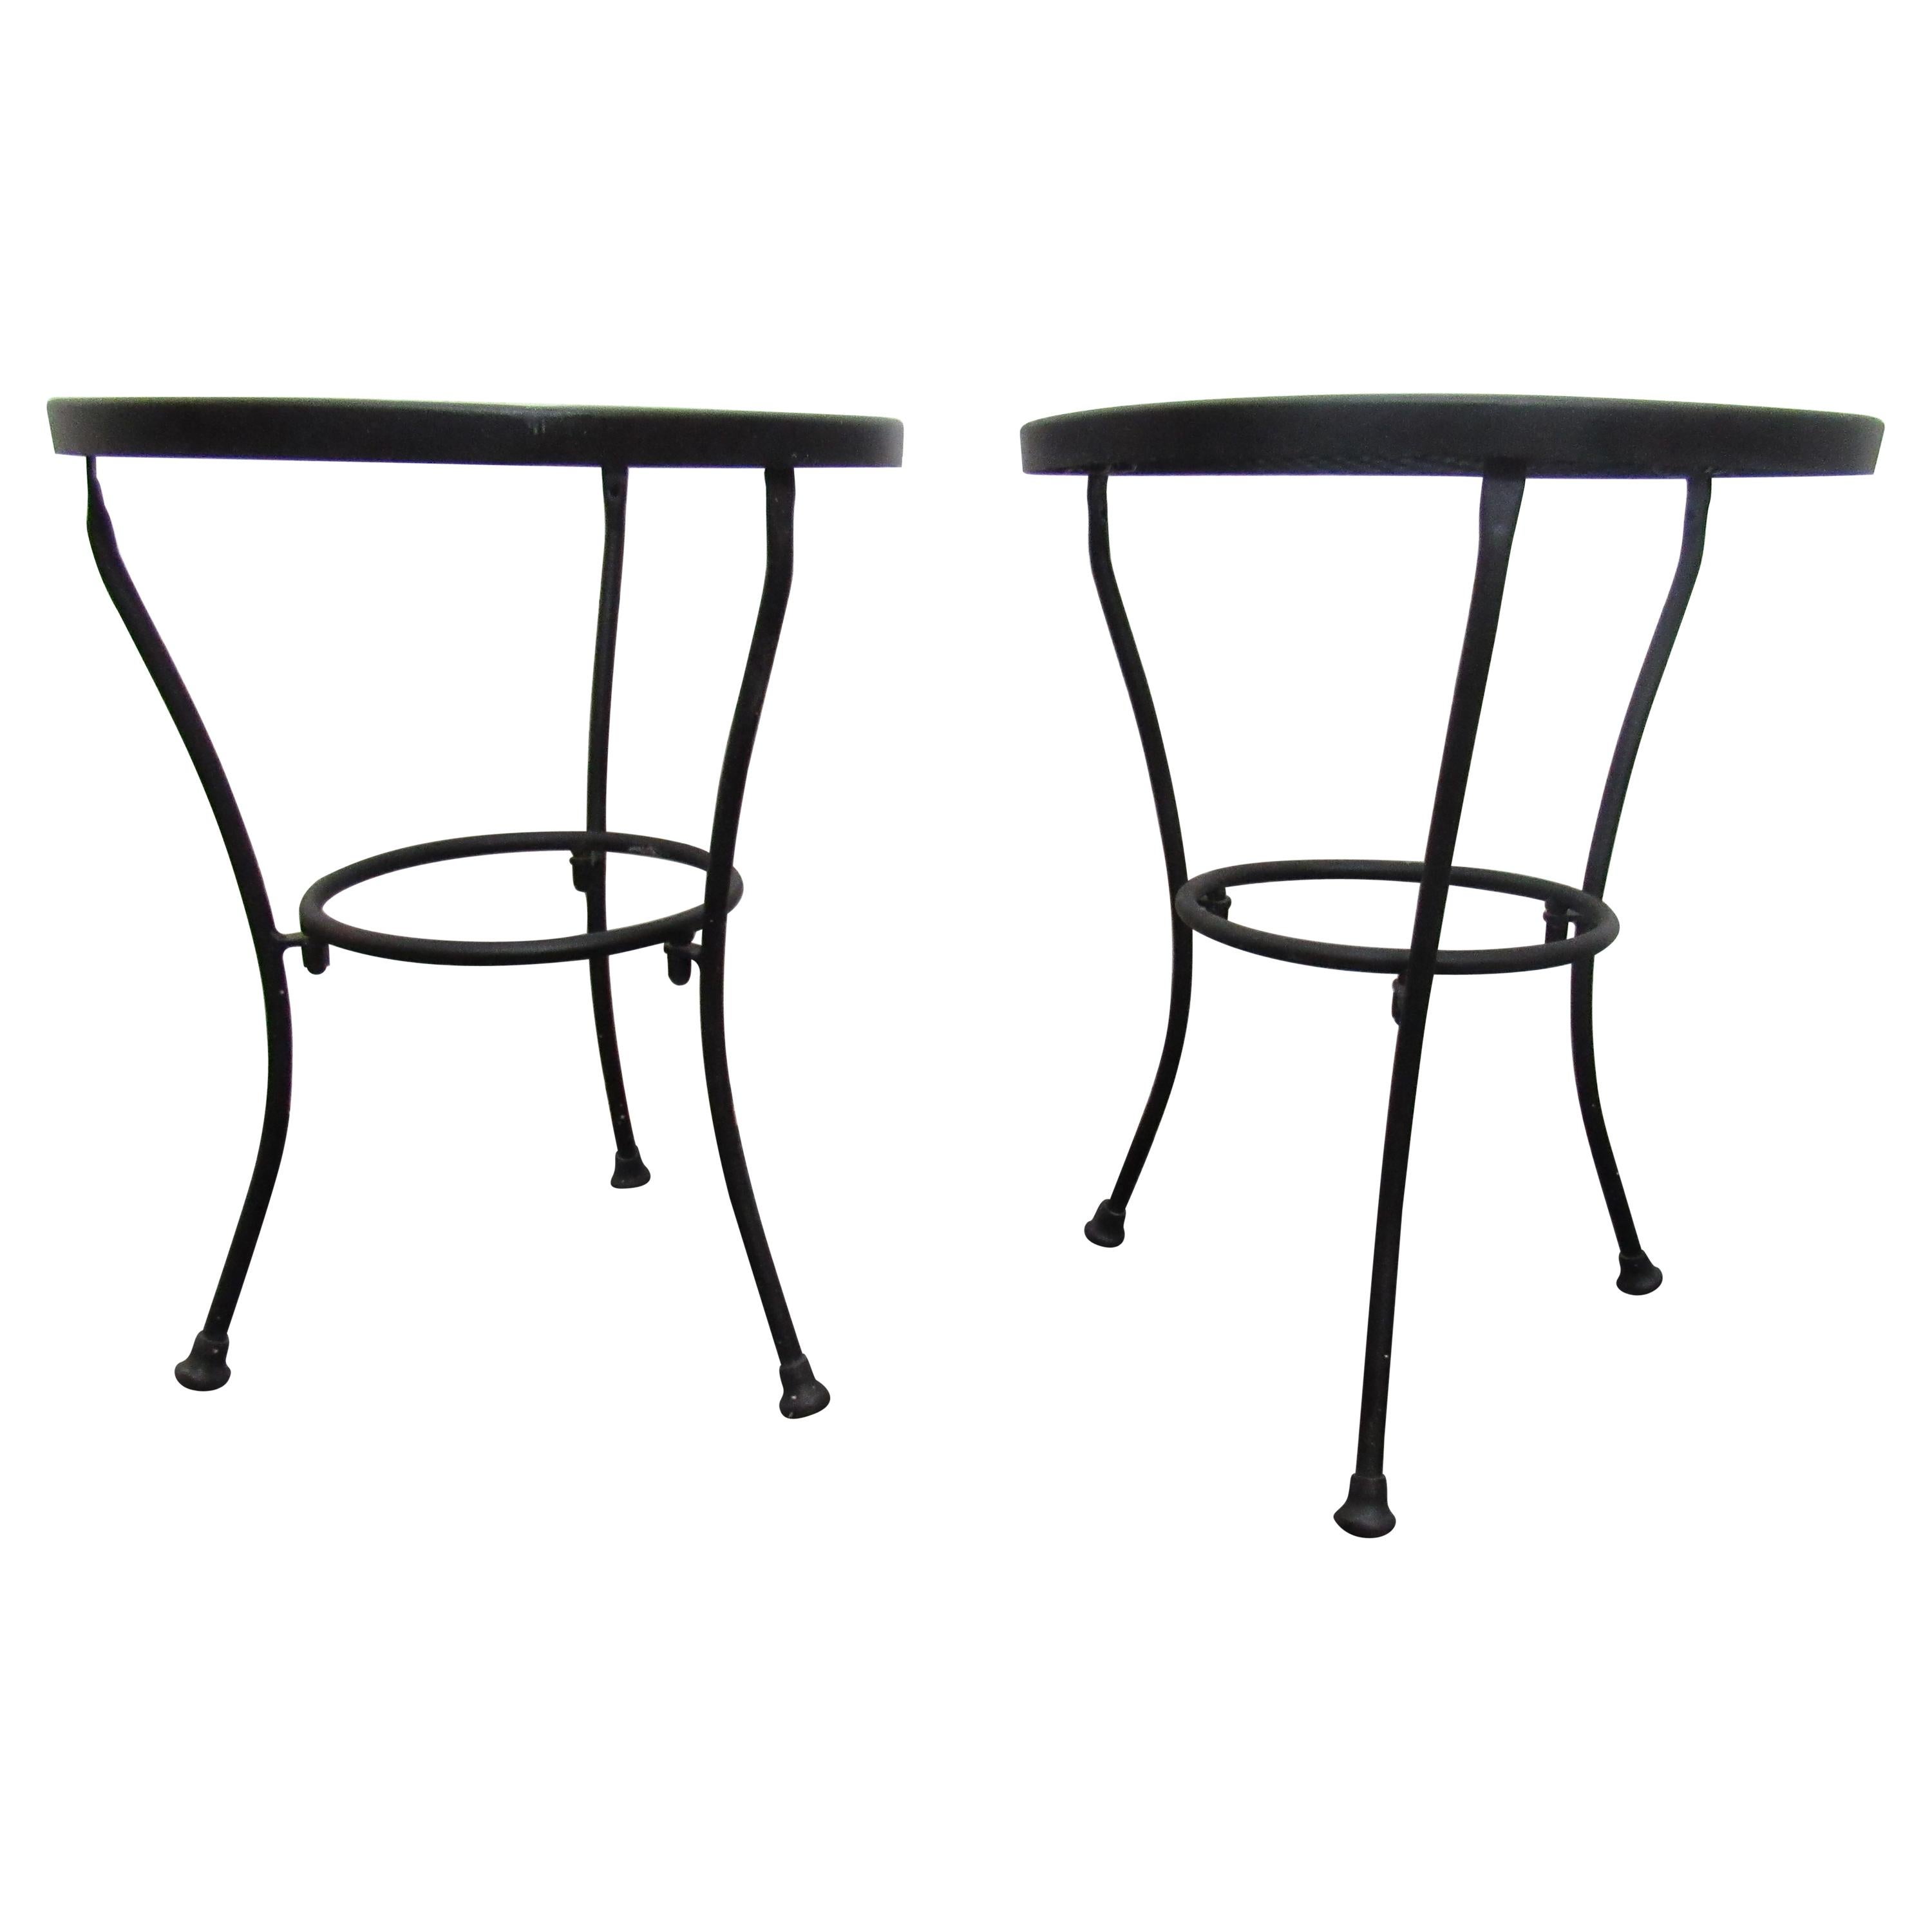 Vintage pair of sturdy black metal side tables, for indoor or outdoor use. Please confirm item location with seller (NY/NJ).